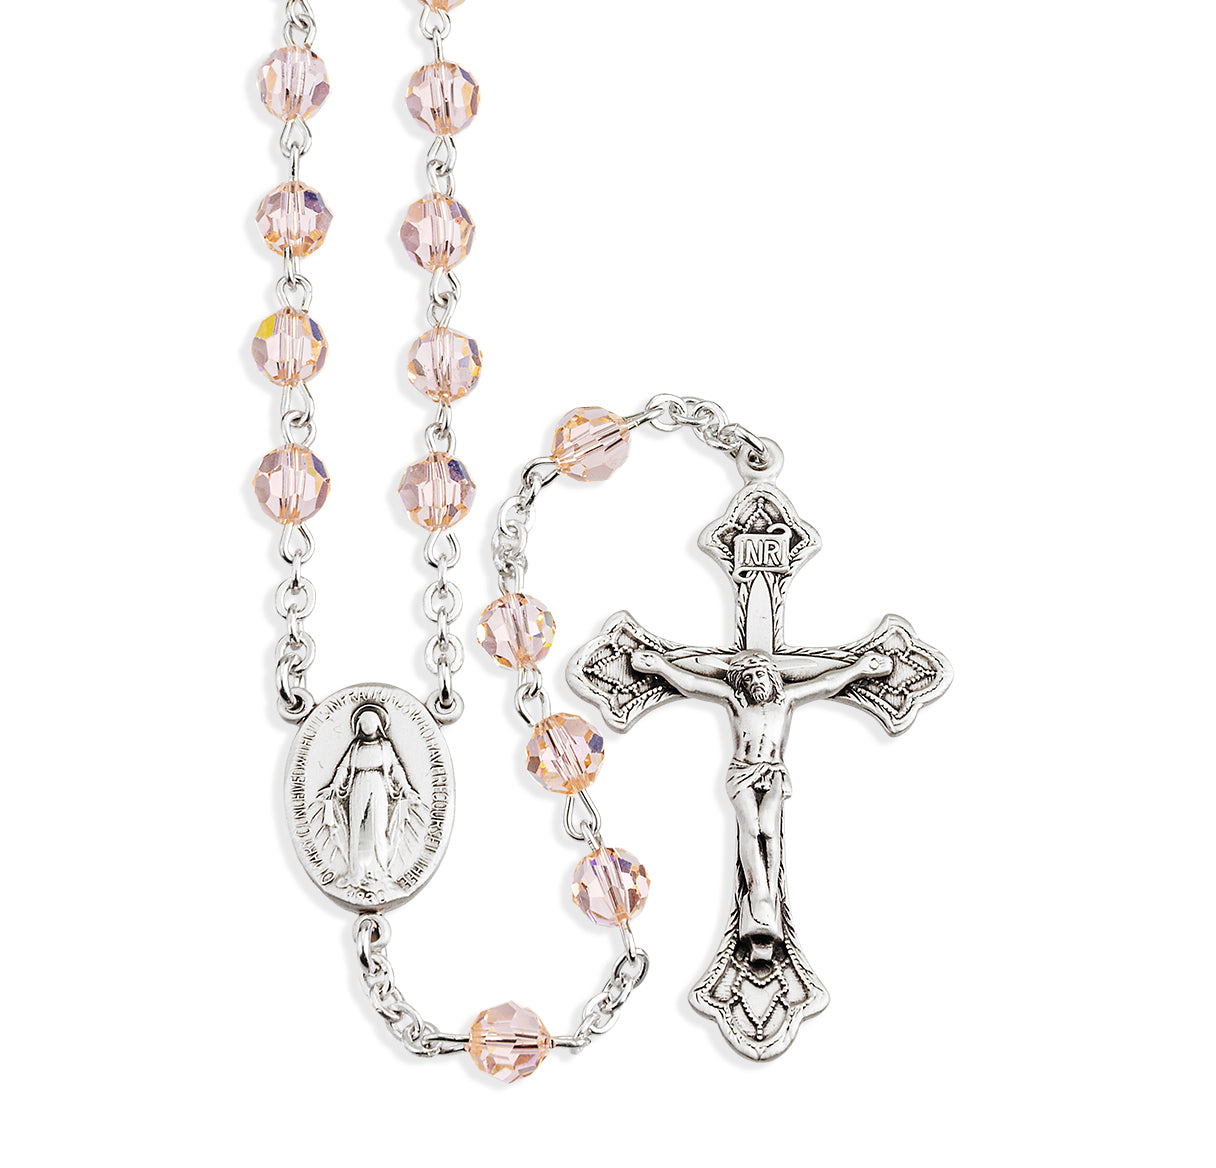 Sterling Silver Rosary Hand Made with Swarovski Crystal 6mm Silk Faceted Round Beads by HMH